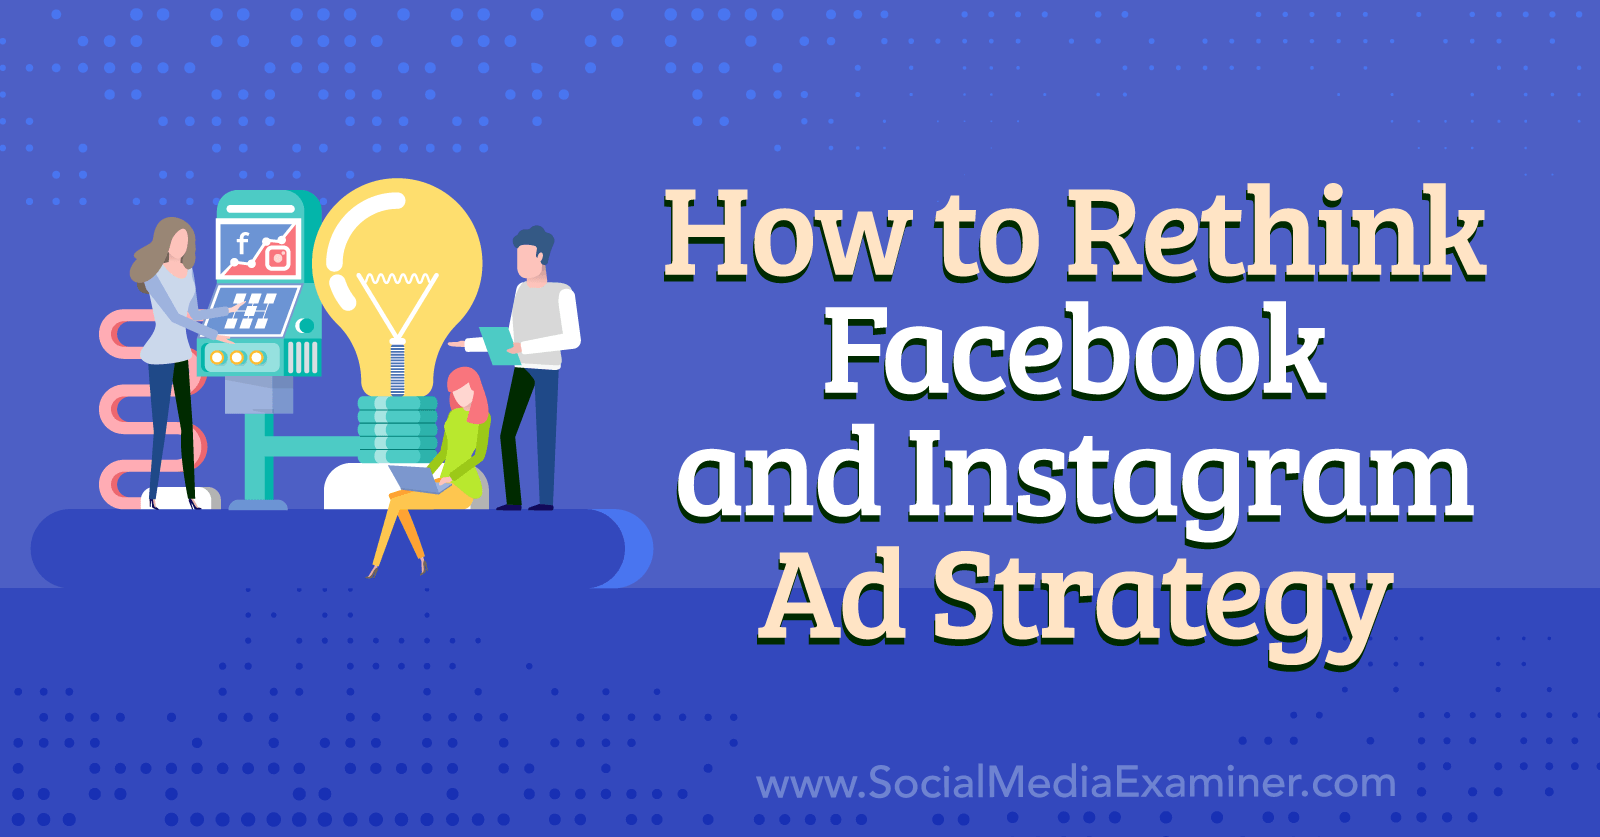 How to Rethink Facebook and Instagram Ad Strategy-Social Media Examiner